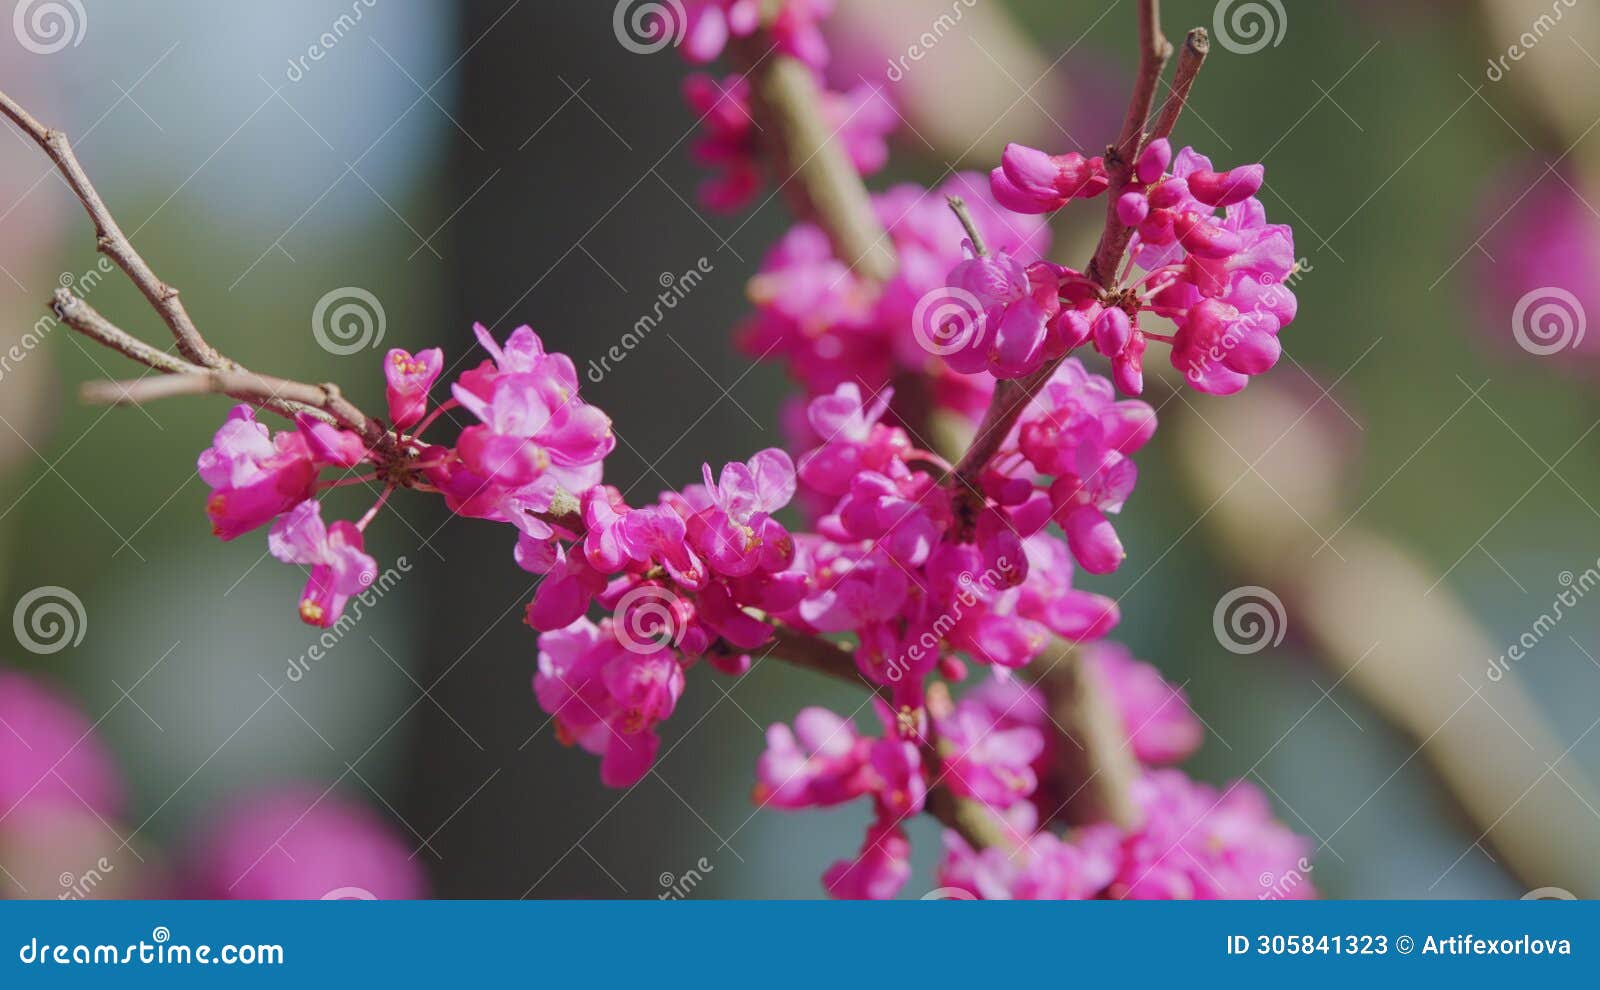 pink flowers of cercis siliquastrum. branches cercis siliquastrum or juda tree with lush pink flowers. close up.